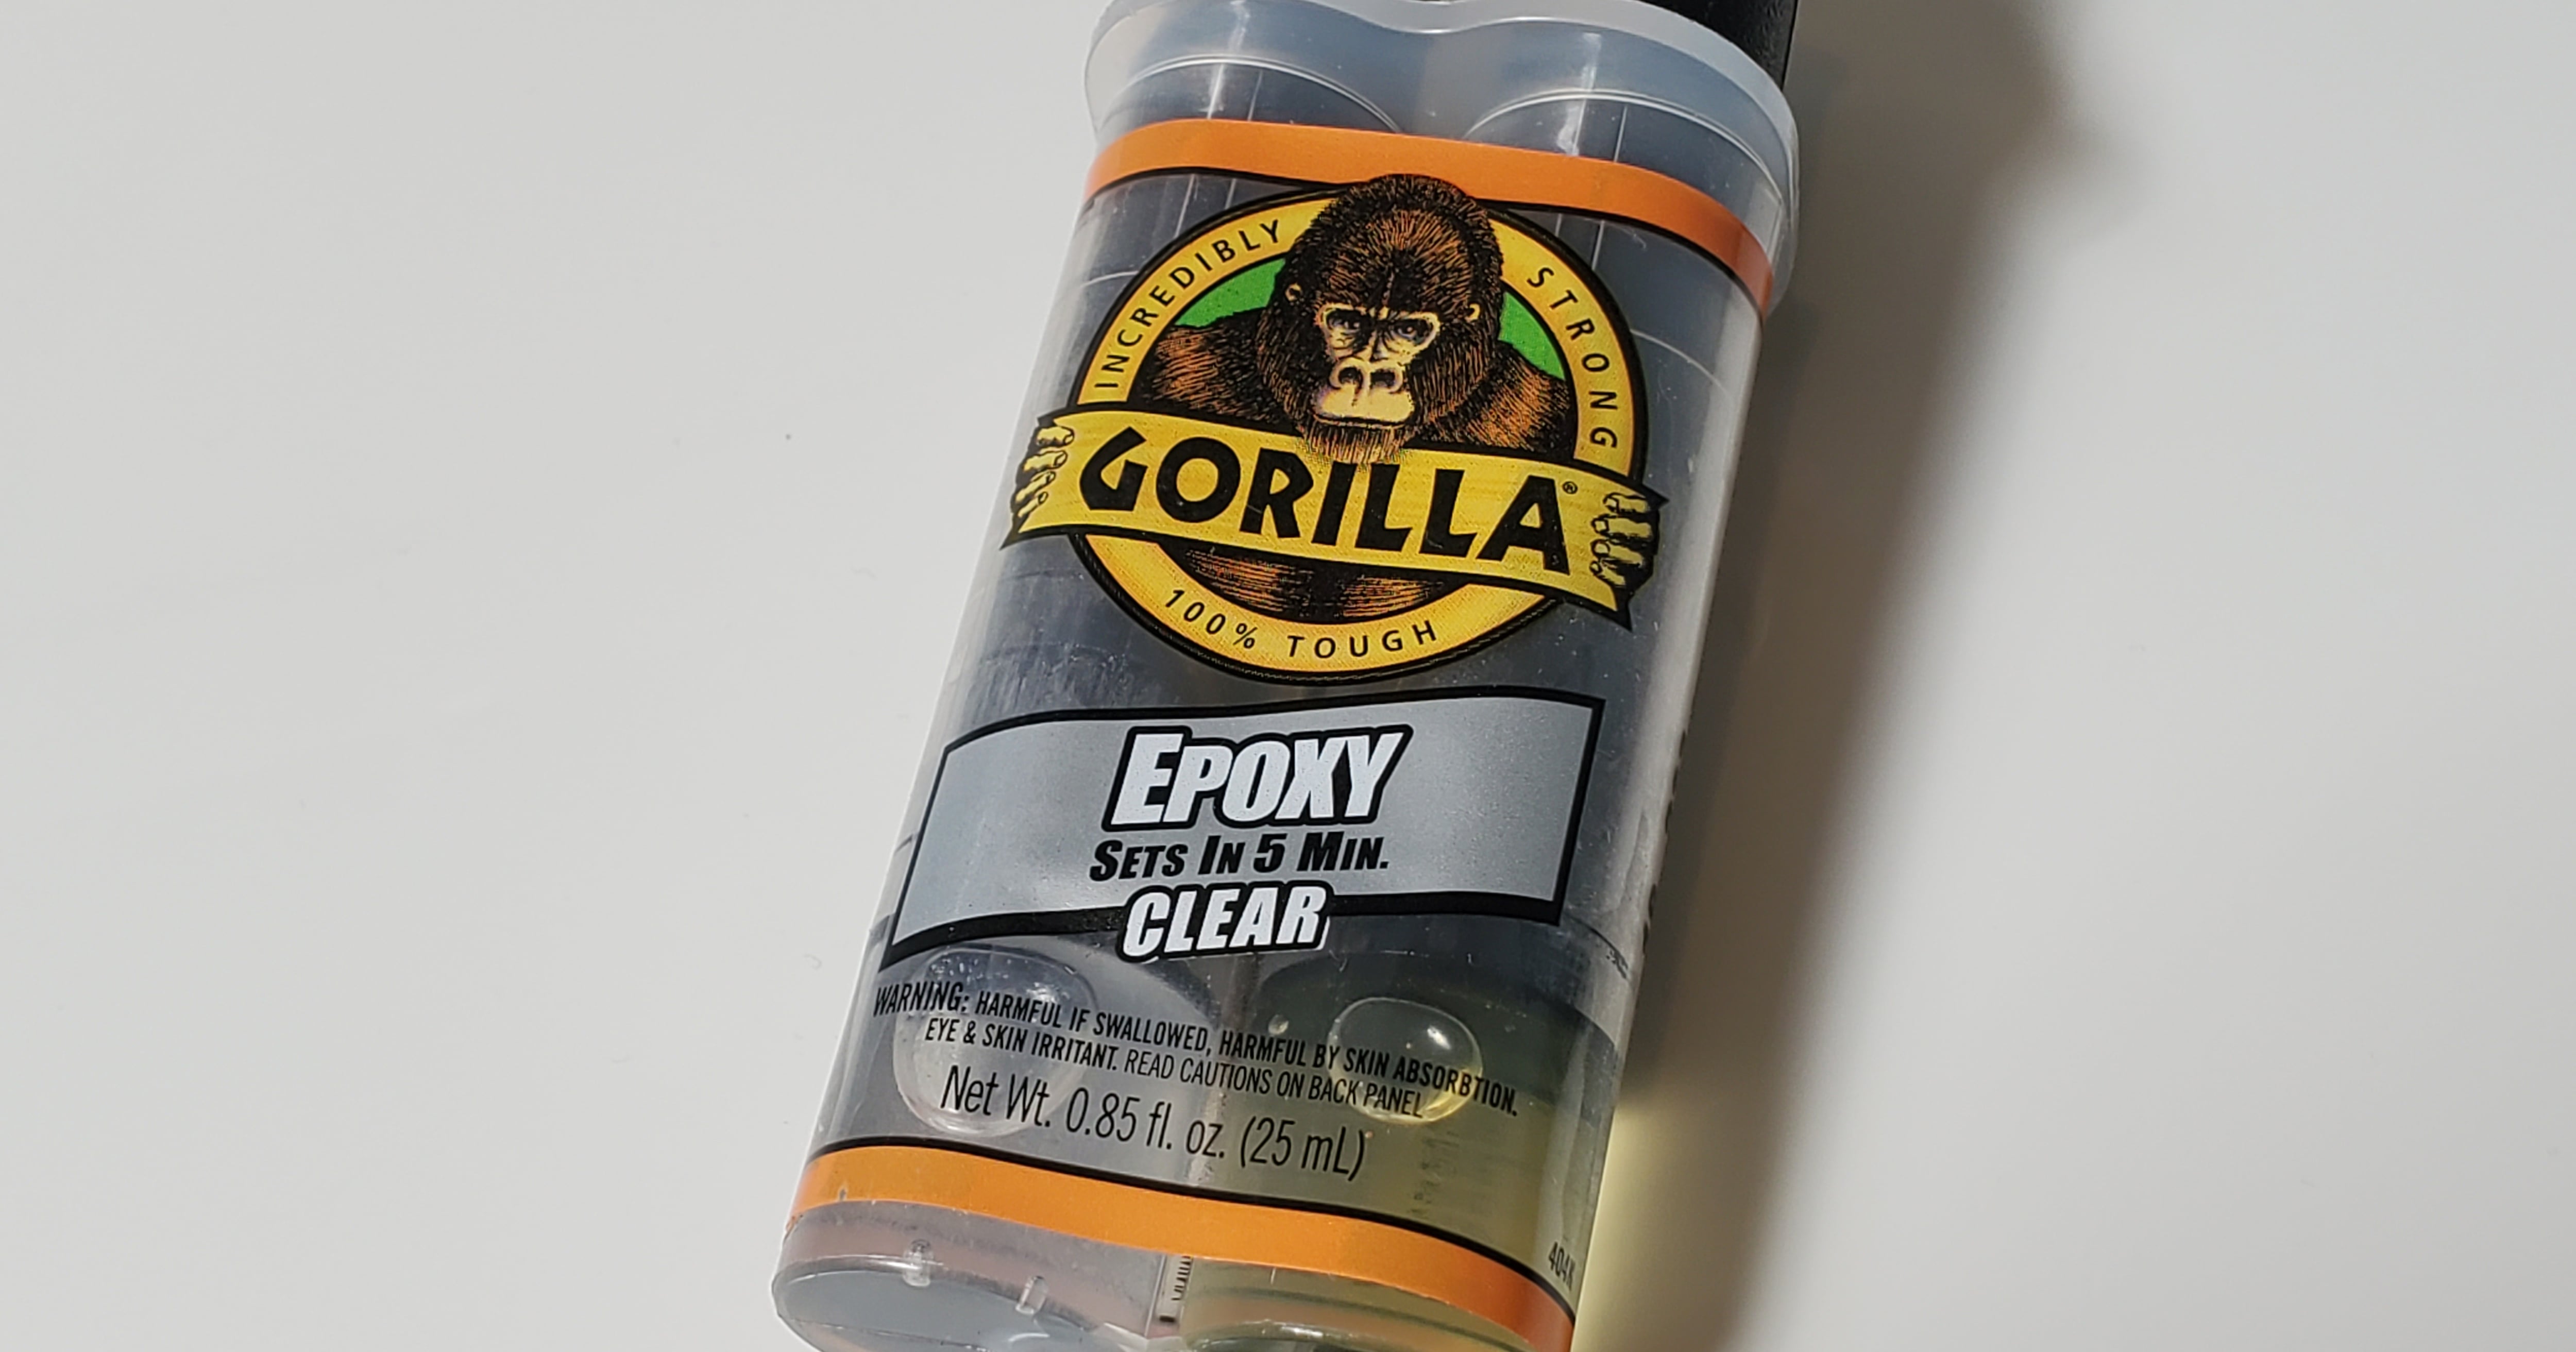 Woman Who Used Gorilla Glue in Hair Launches Her Own Haircare Line